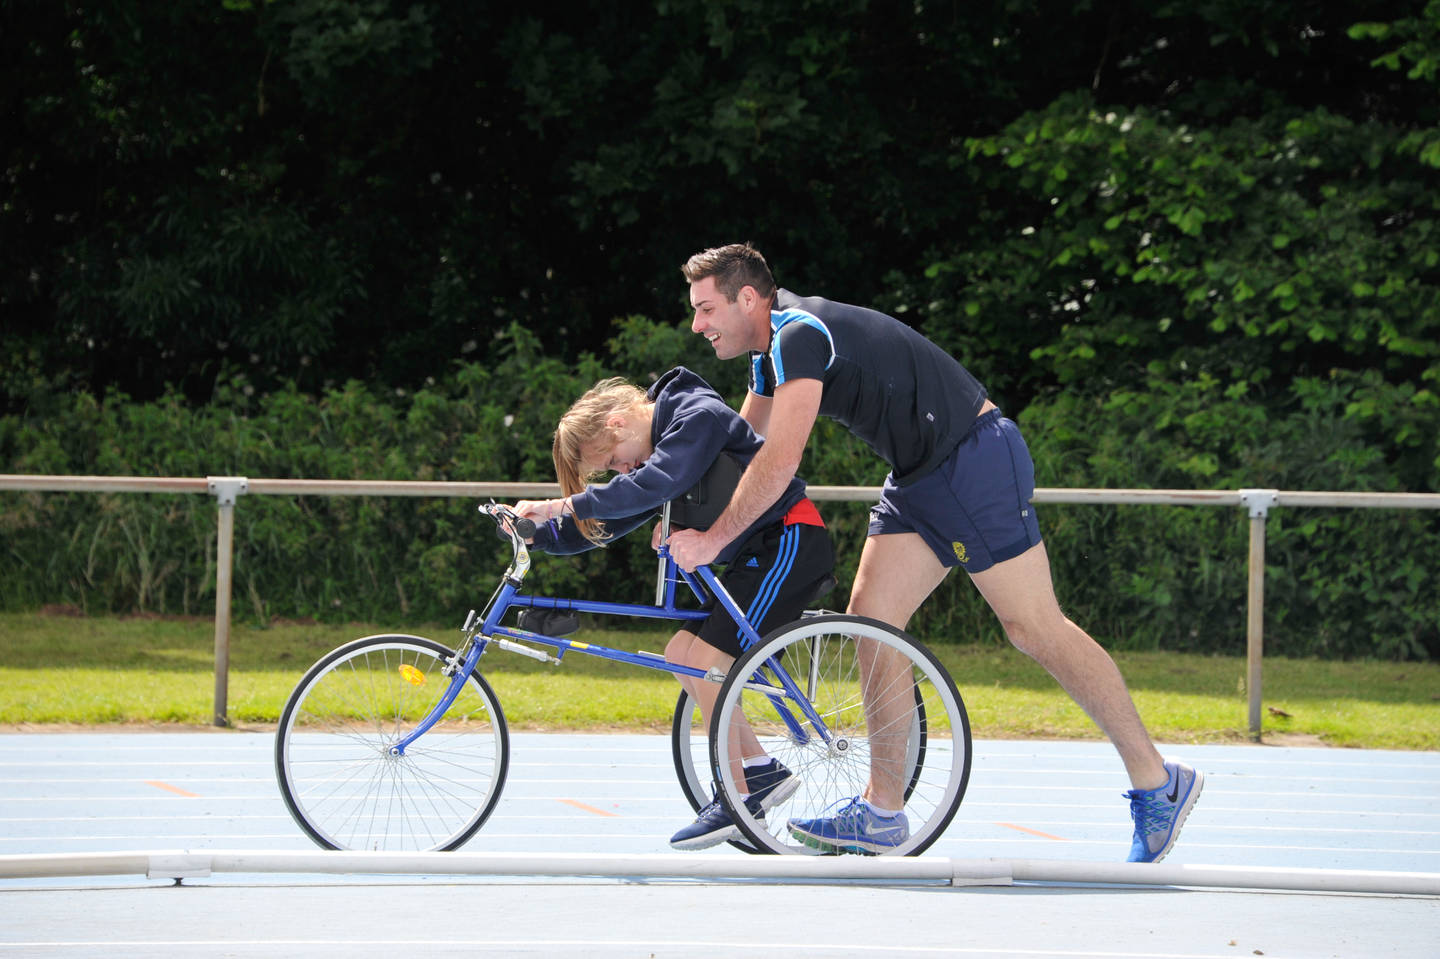 A disabled child race running with support from a teacher